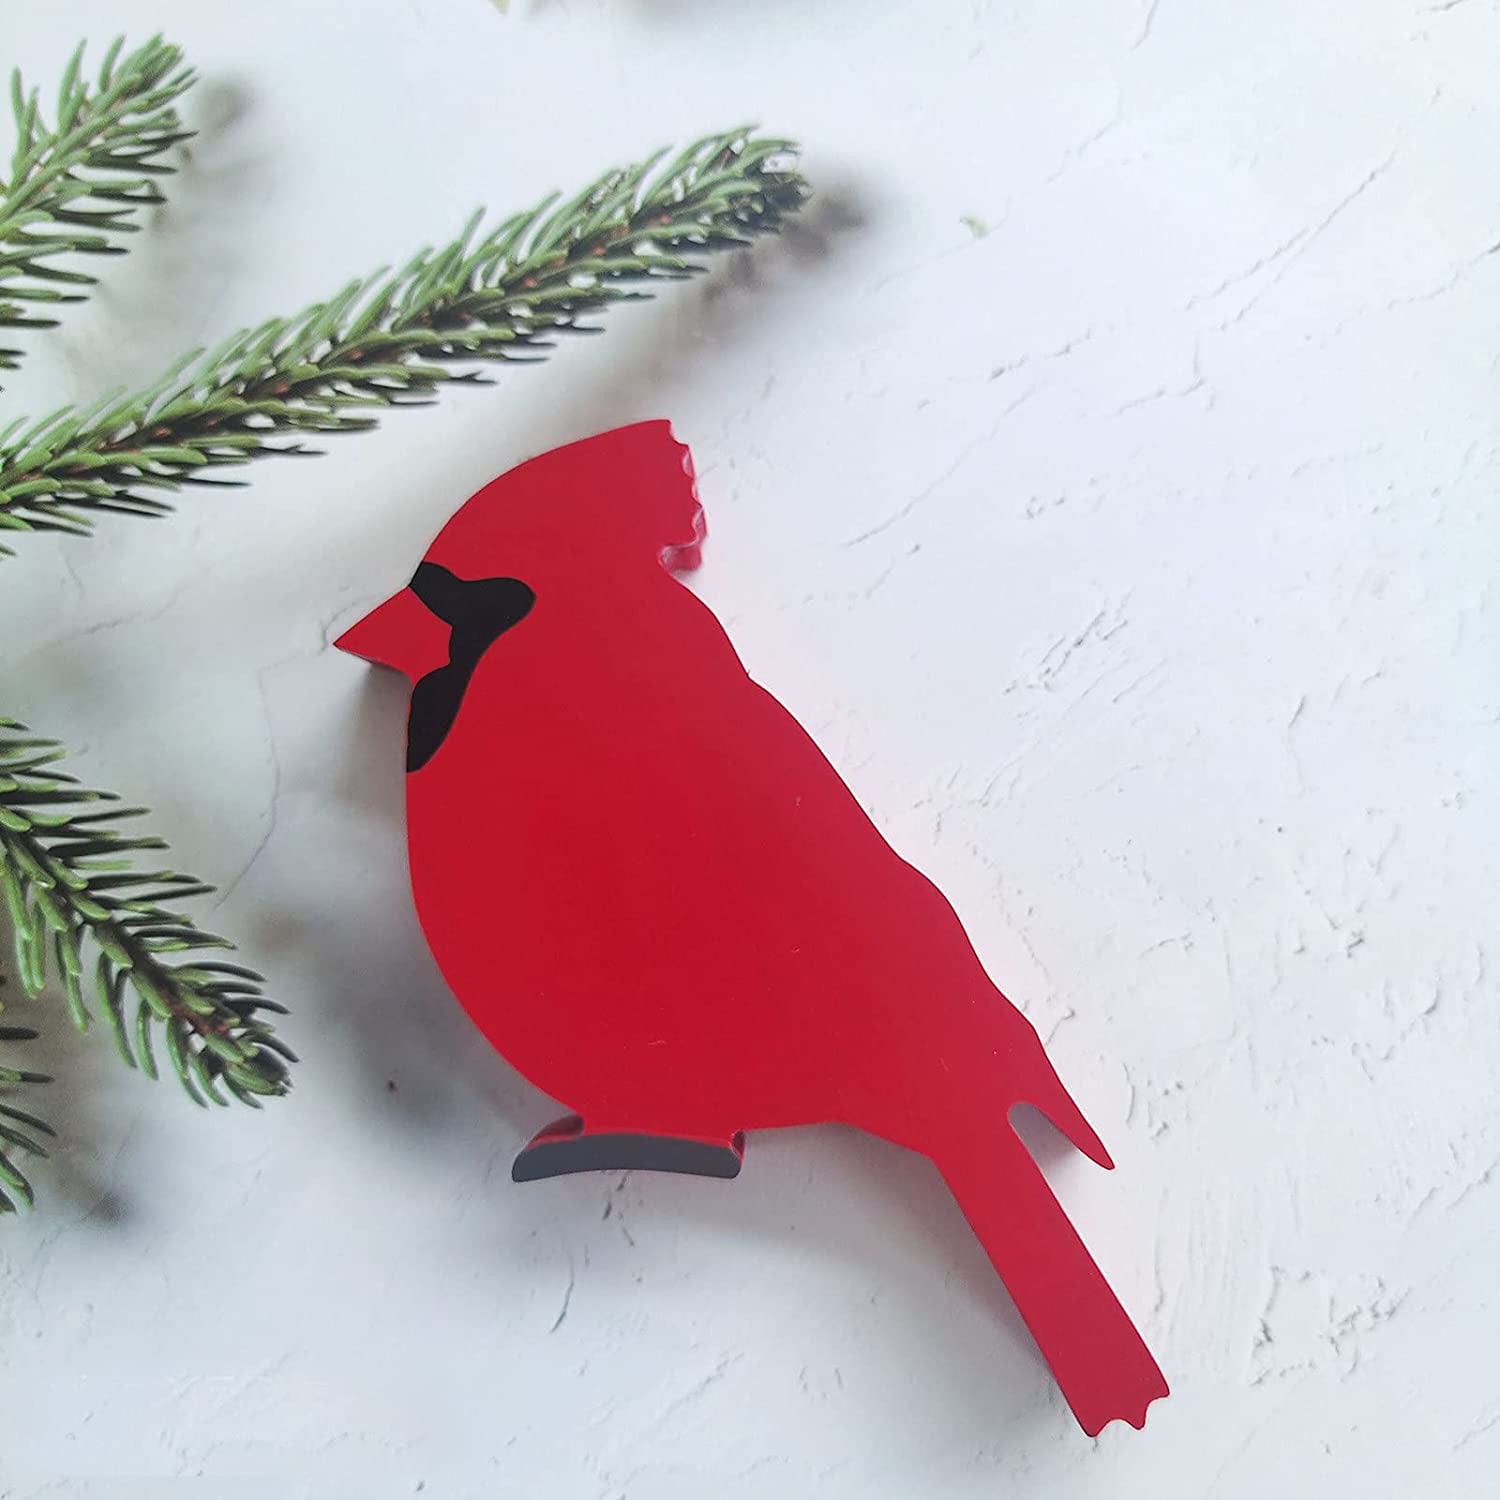 Window Hangings Home New Gifts Red bird Wooden Bird decor Ornament 